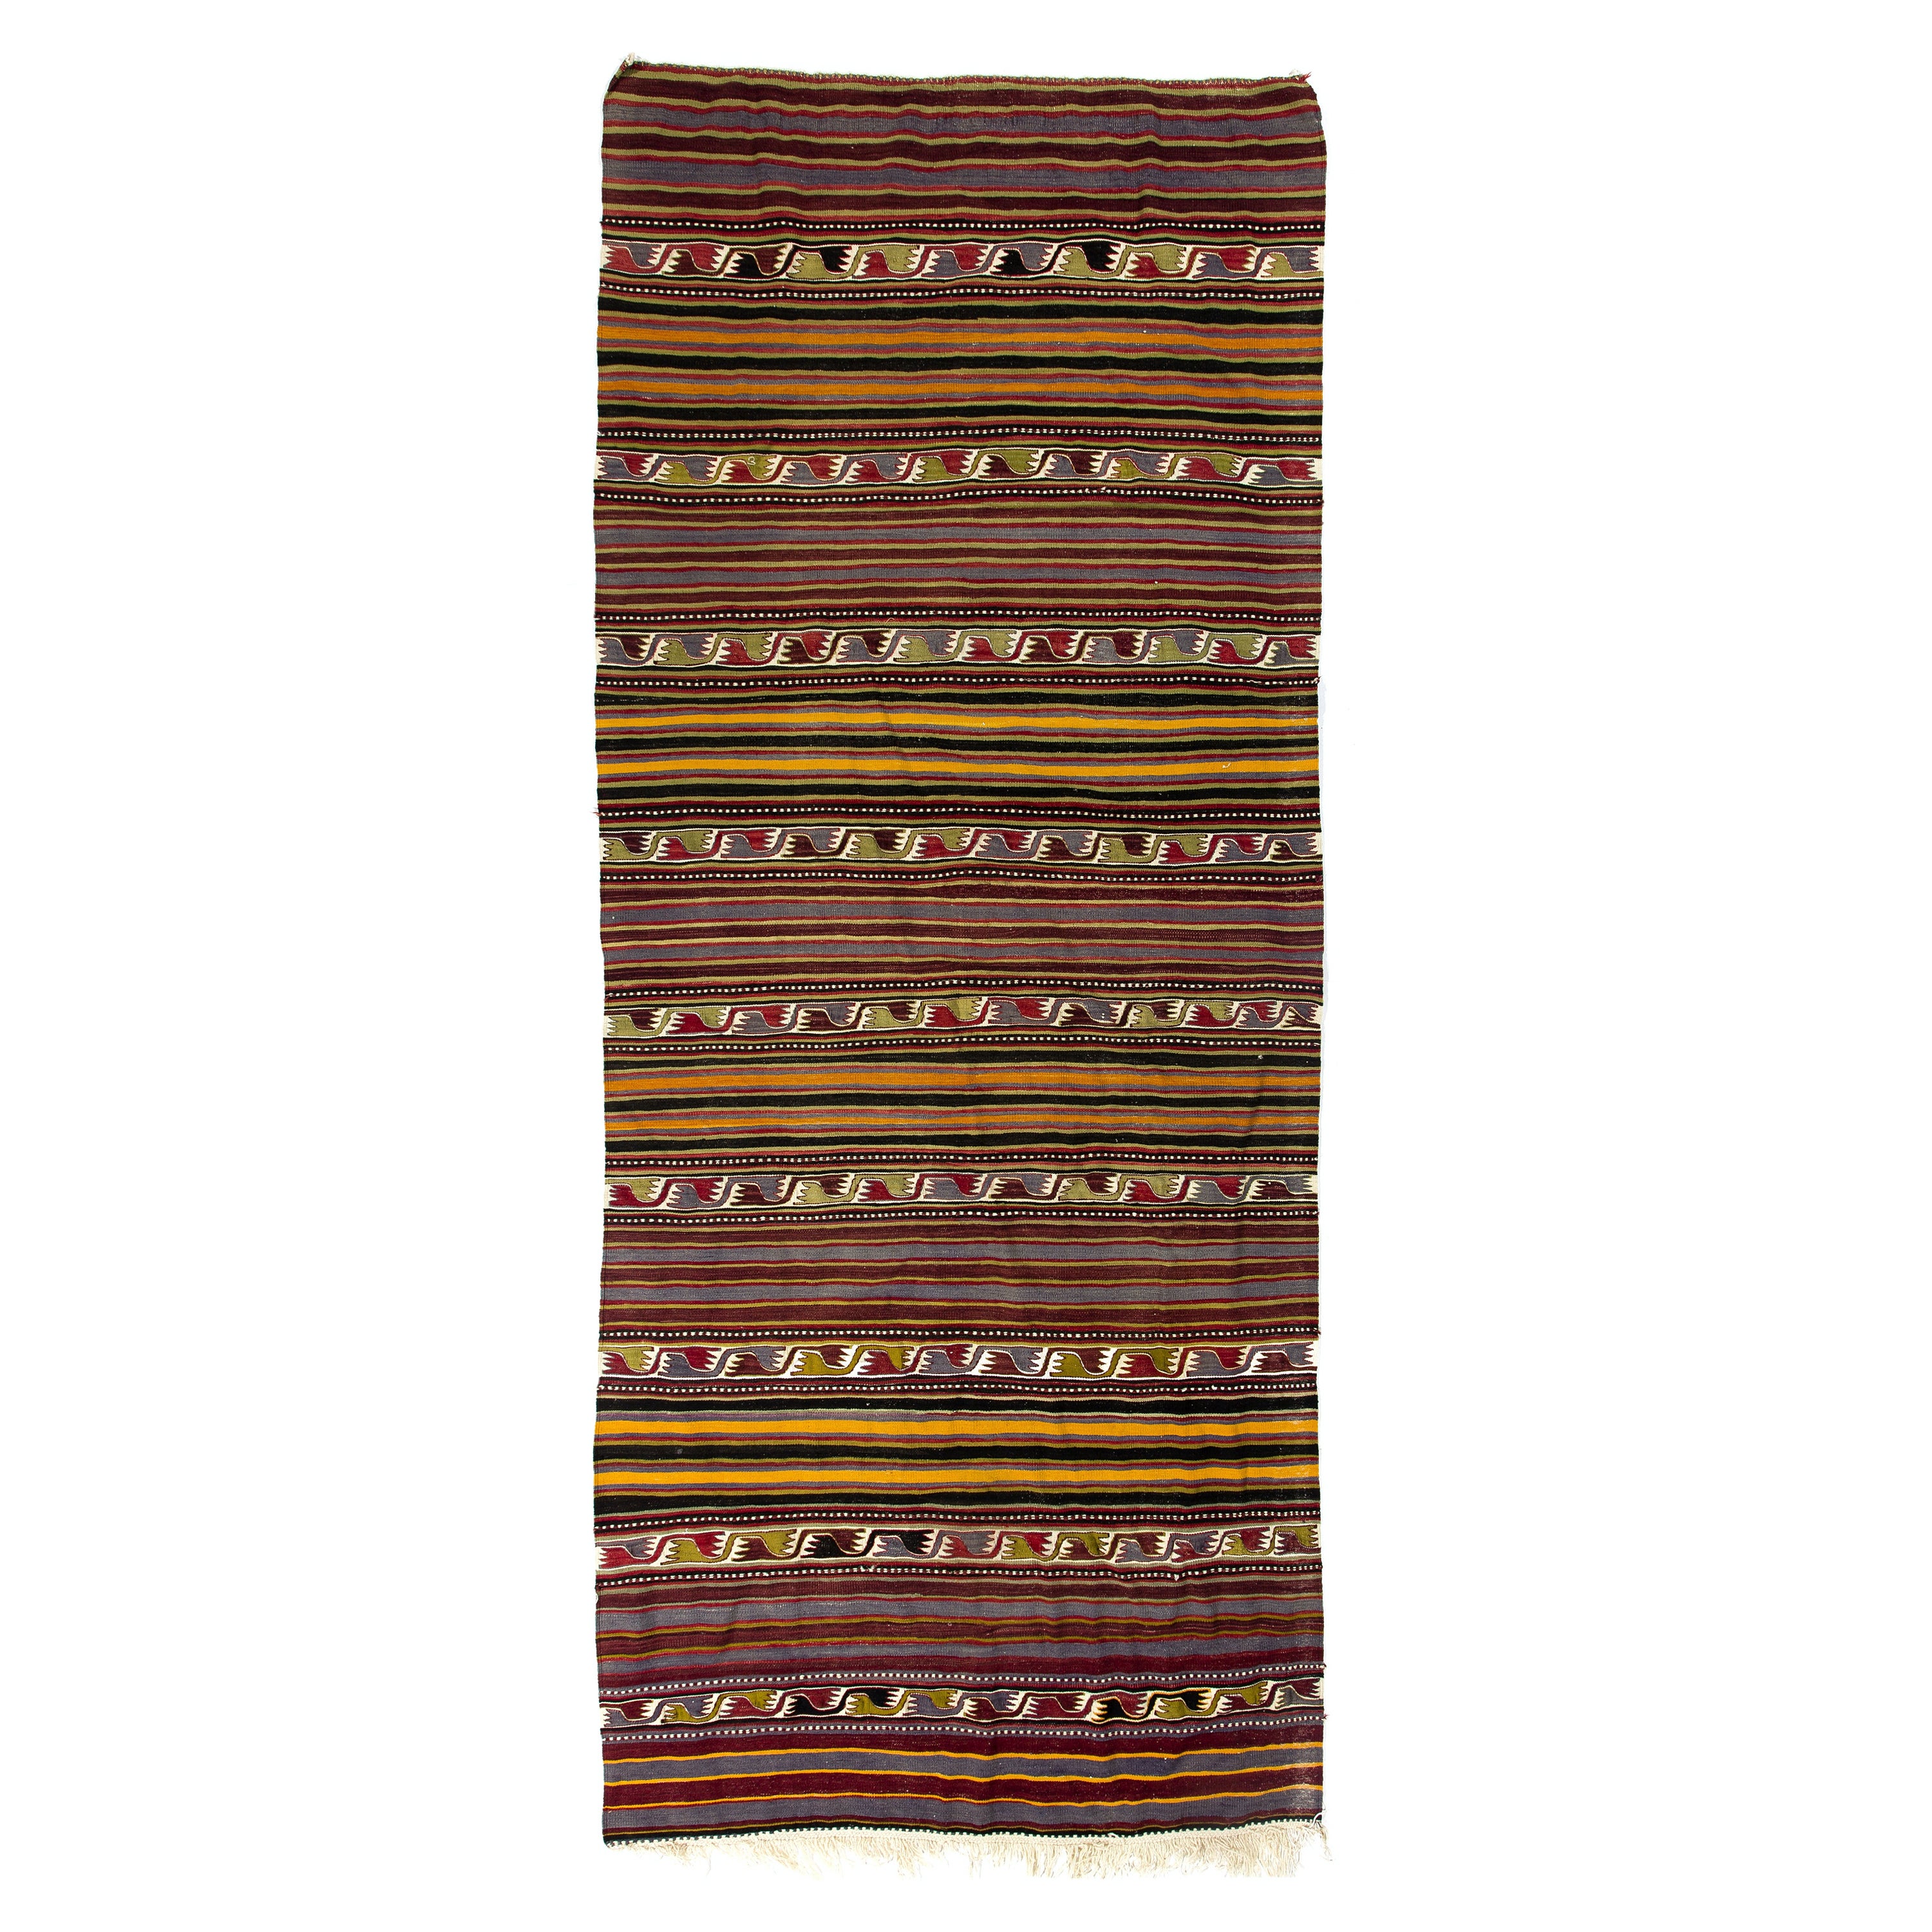 5.2x12.7 Ft Banded Hand-Woven Vintage Turkish Runner Kilim 'FlatWeave', All Wool For Sale